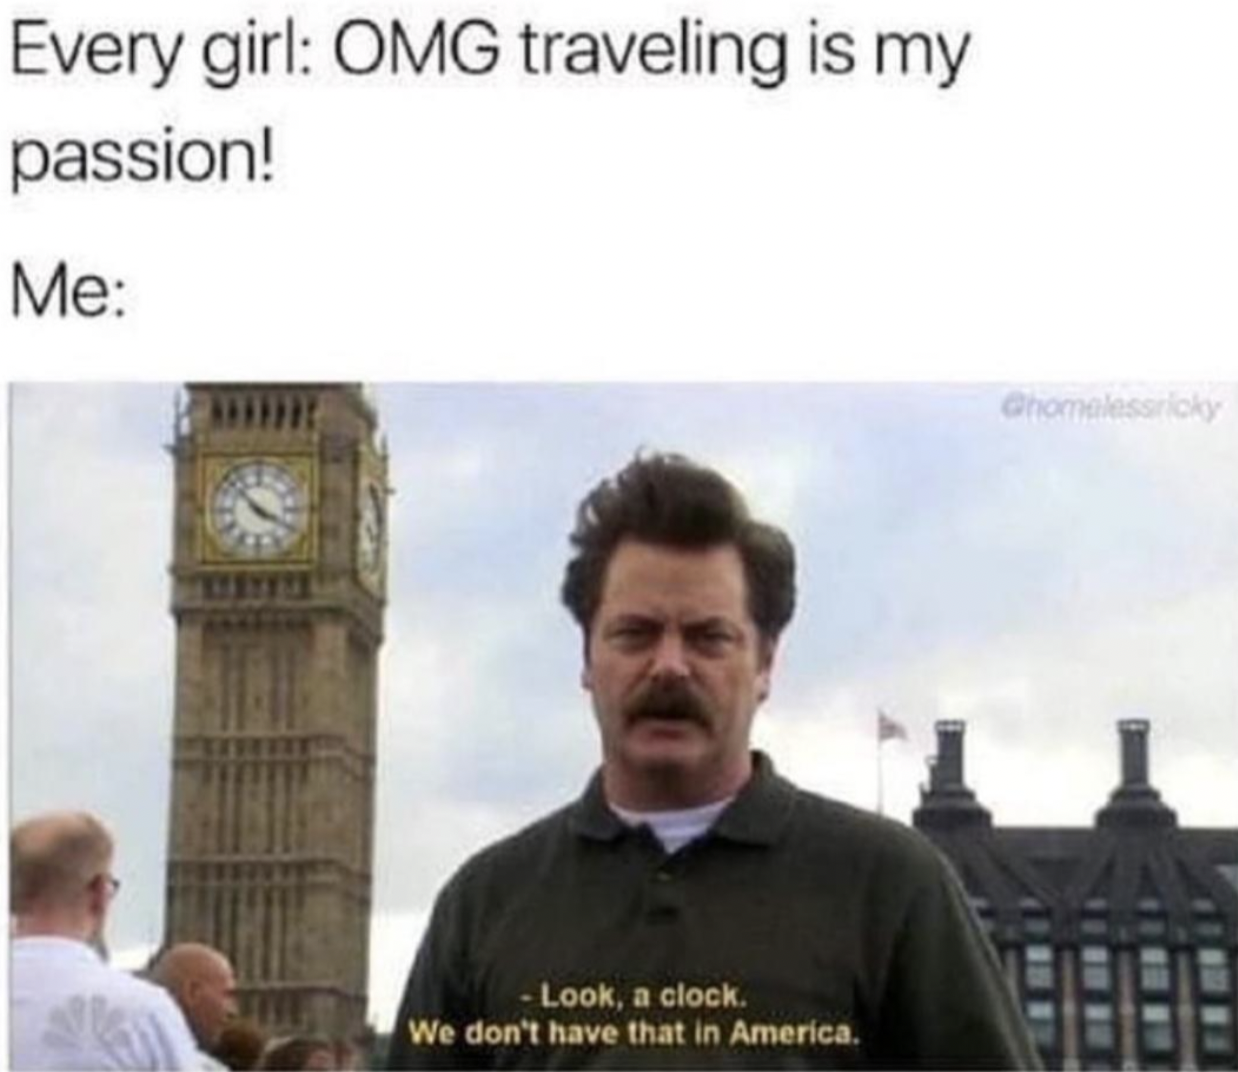 travelling memes - Every girl Omg traveling is my passion! Me Look, a clock. We don't have that in America. Ghomelessricky